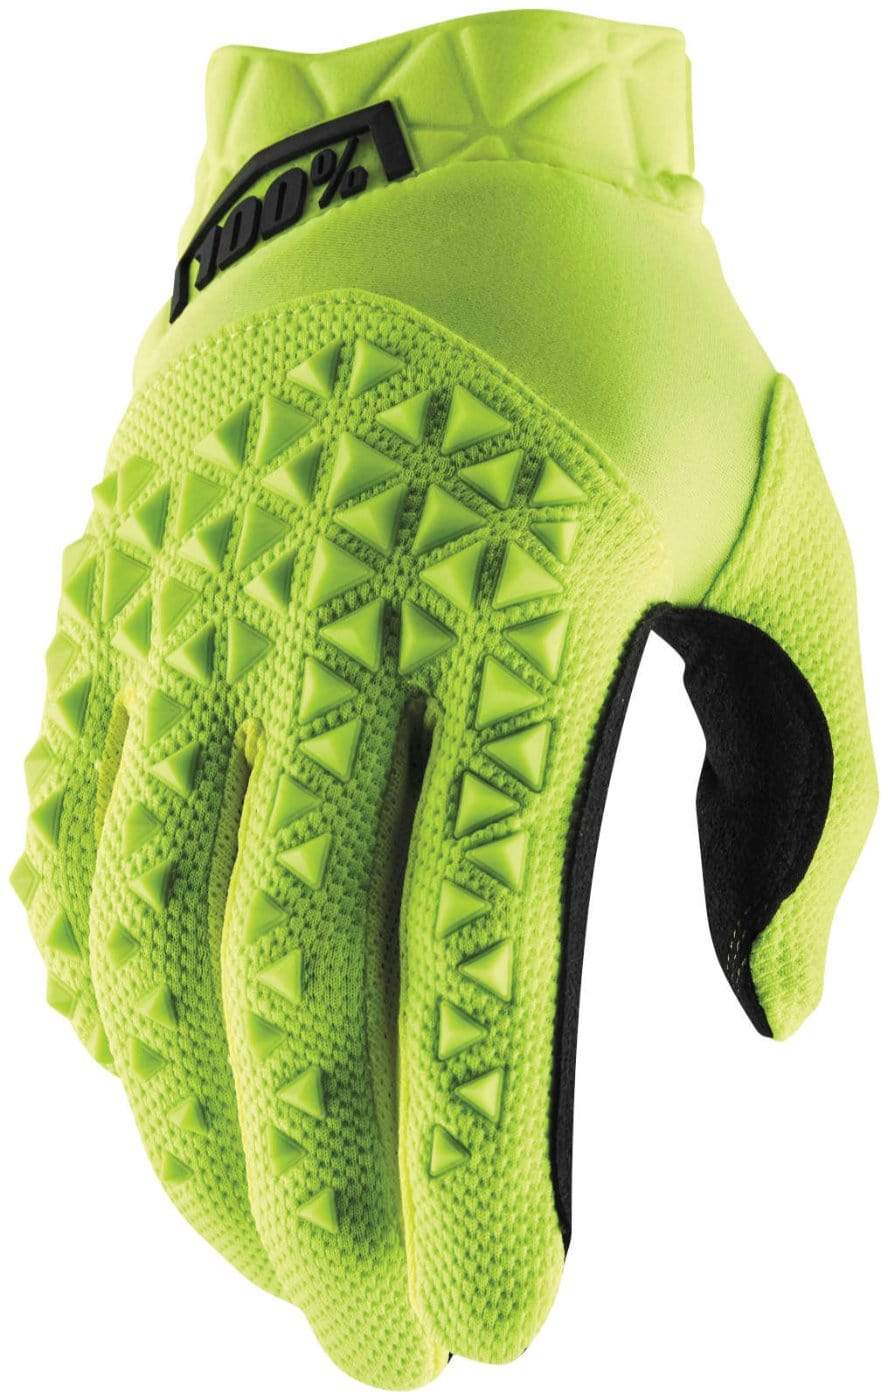 100% Apparel 100% Youth Airmatic Gloves Fluorescent Yellow/Black